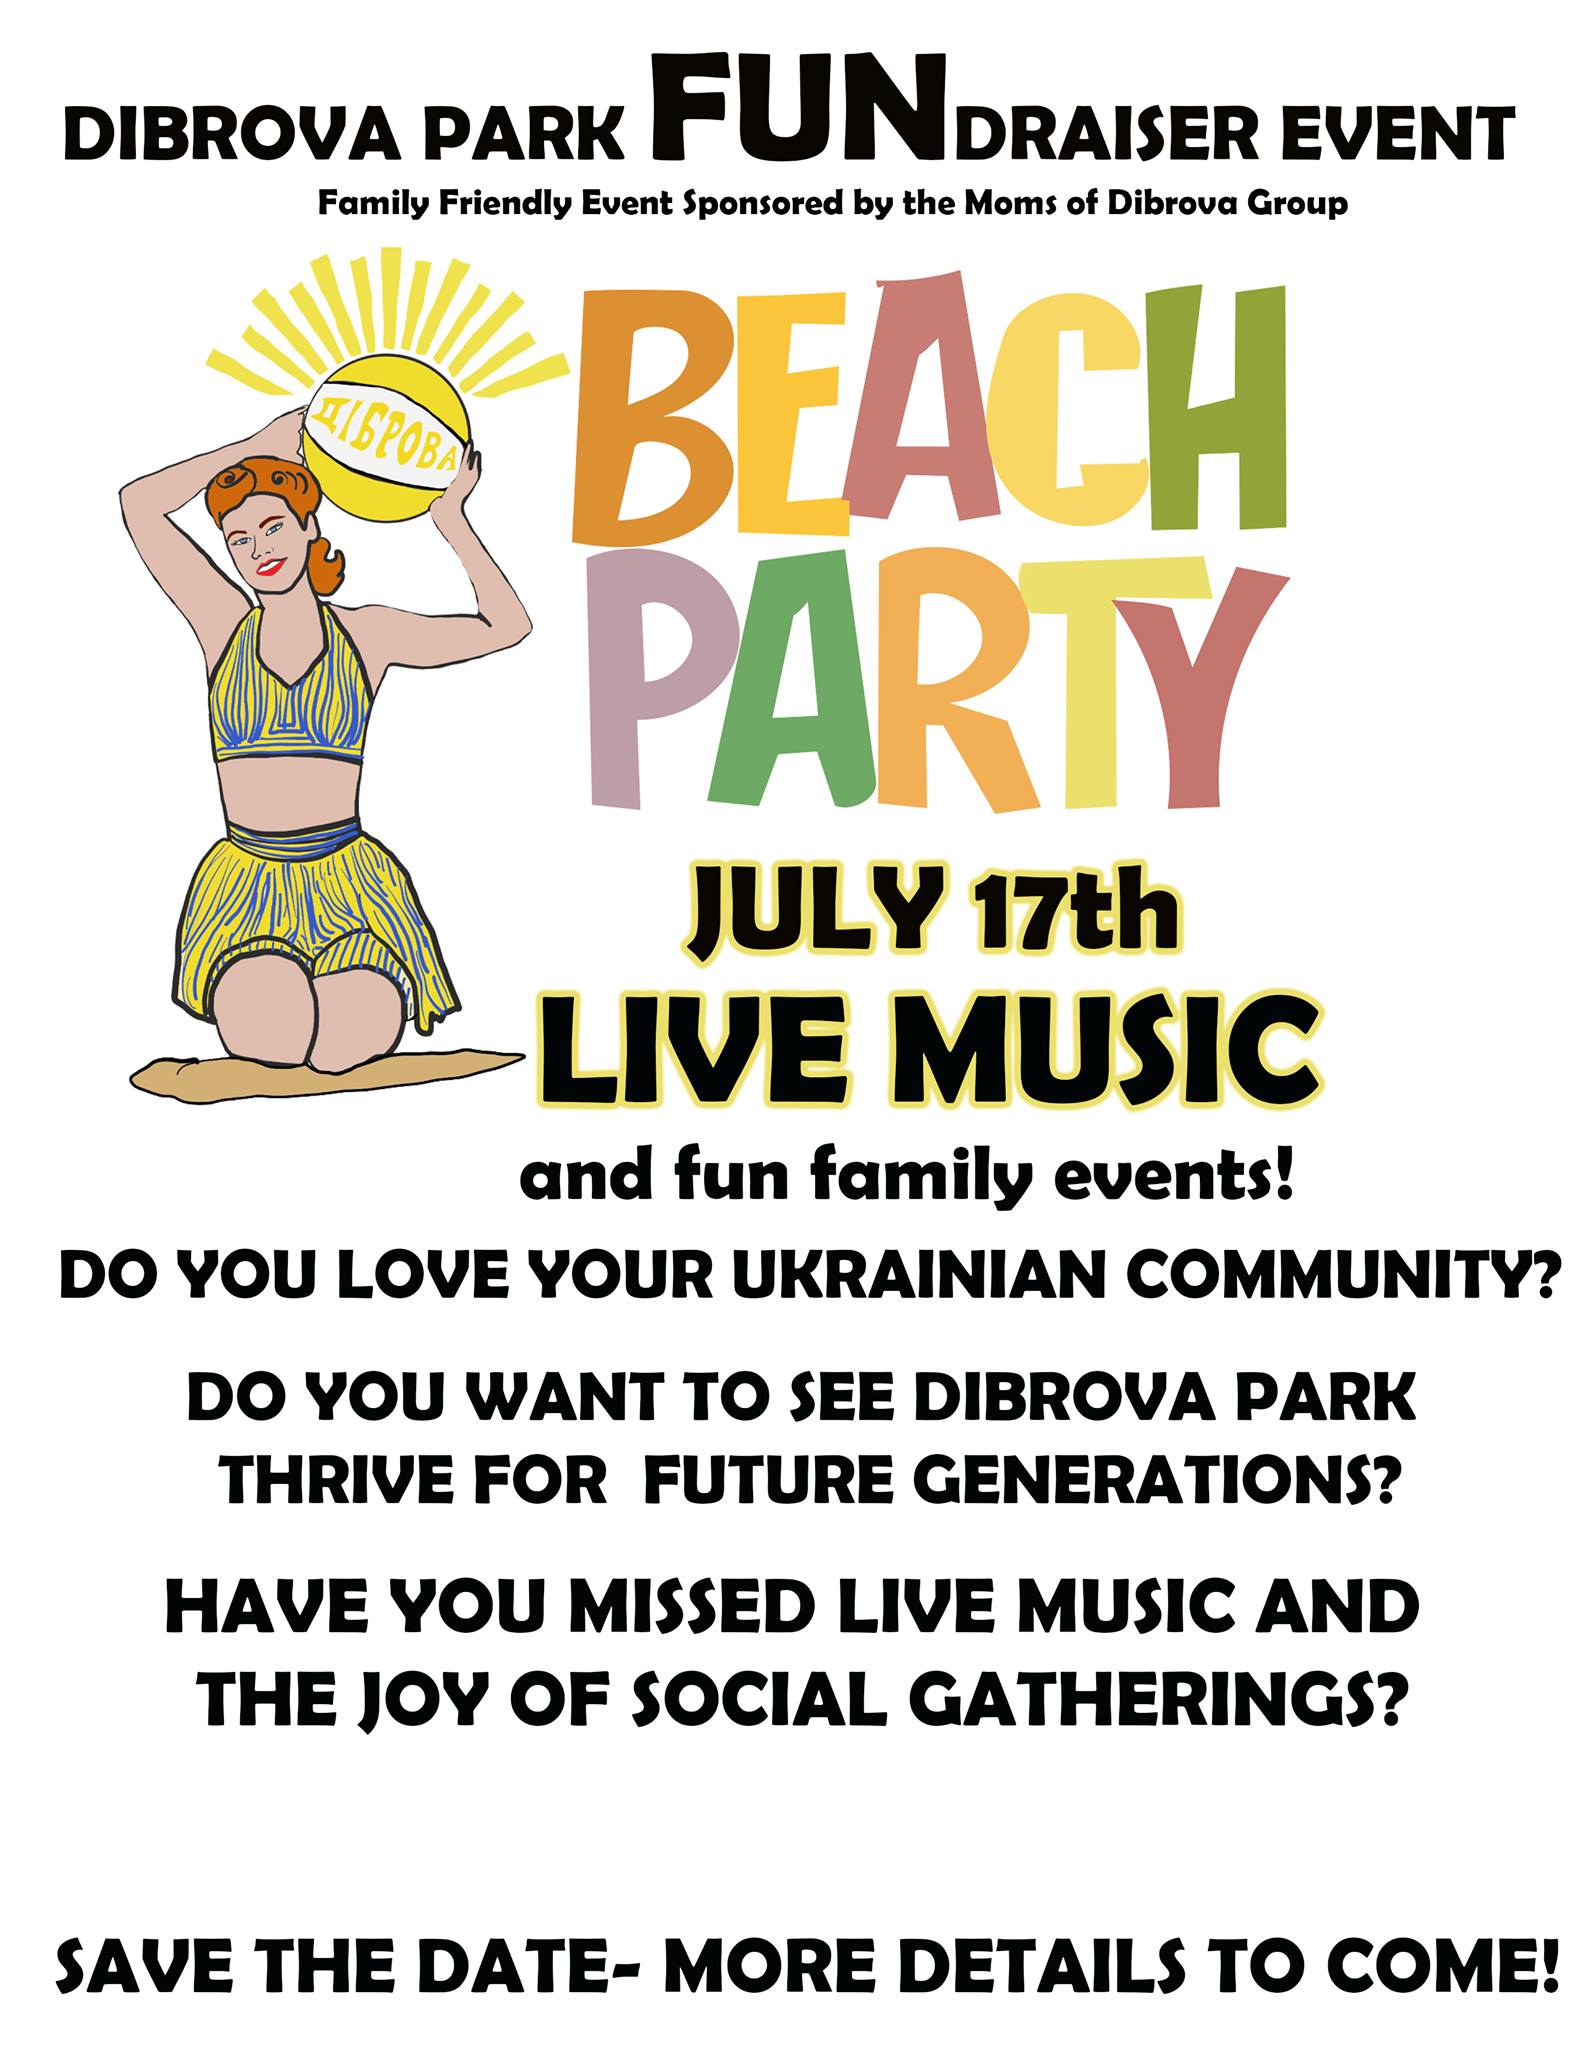 May be an image of 2 people and text that says 'SAVE THE DATE! Ao6poBa 50'S- 60's BEACH PARTY July 17th, 2021 Stay tuned for more details. Sponsored by the Moms of Dibrova'